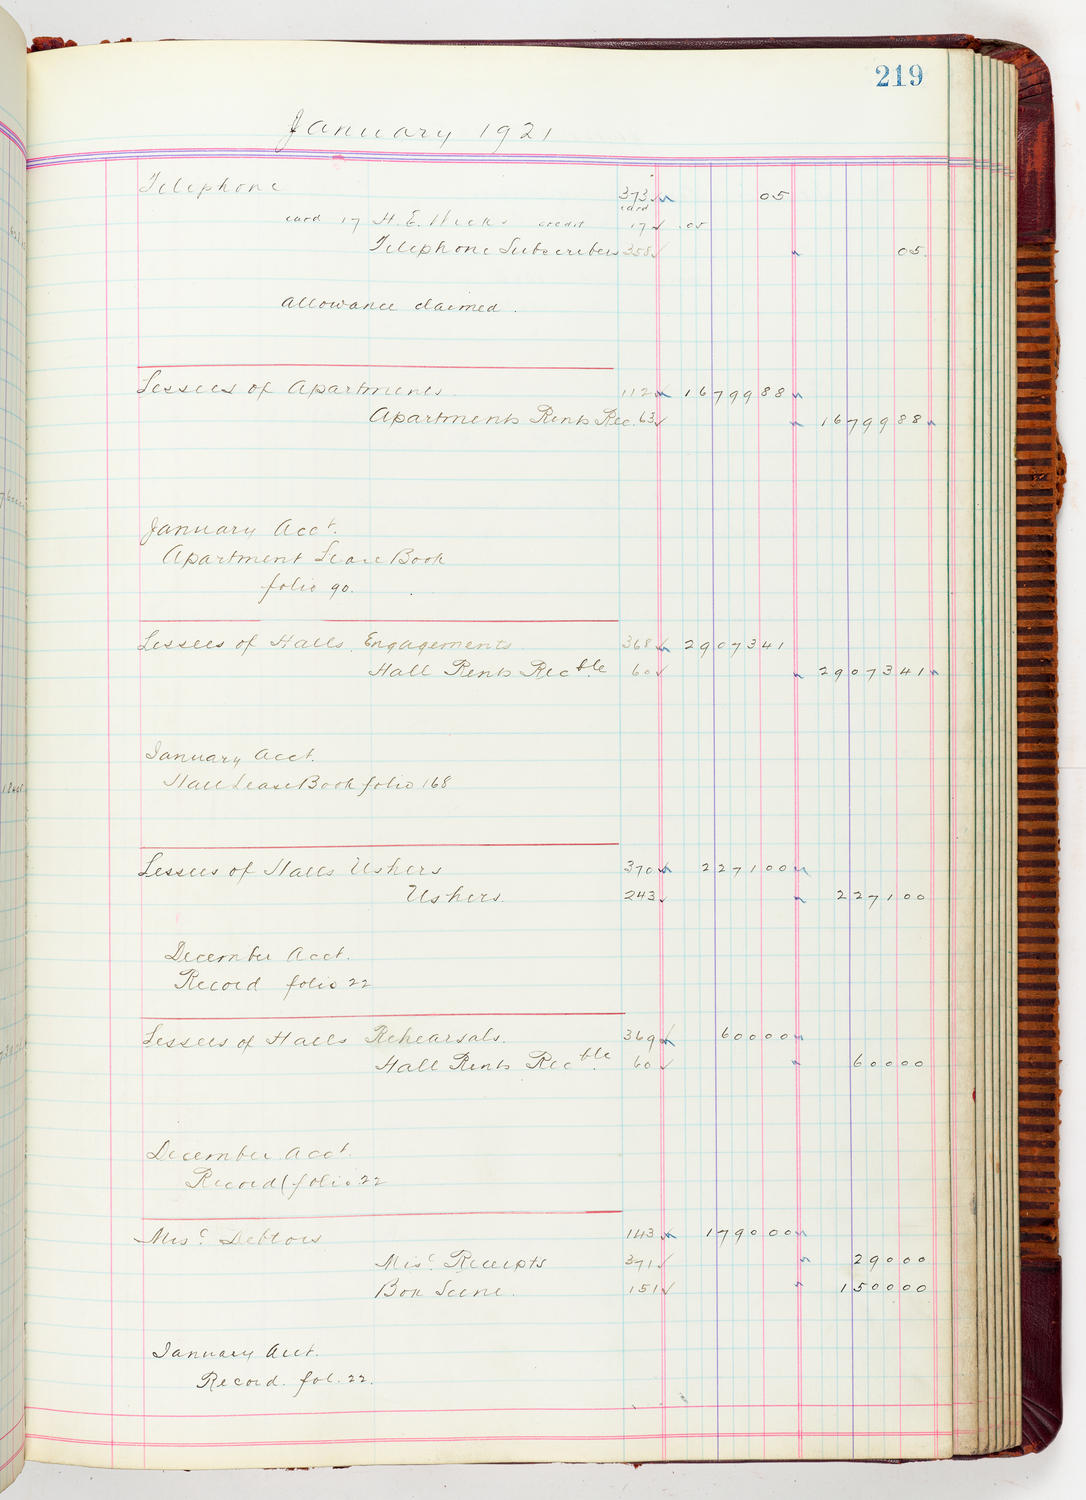 Music Hall Accounting Ledger, volume 5, page 219